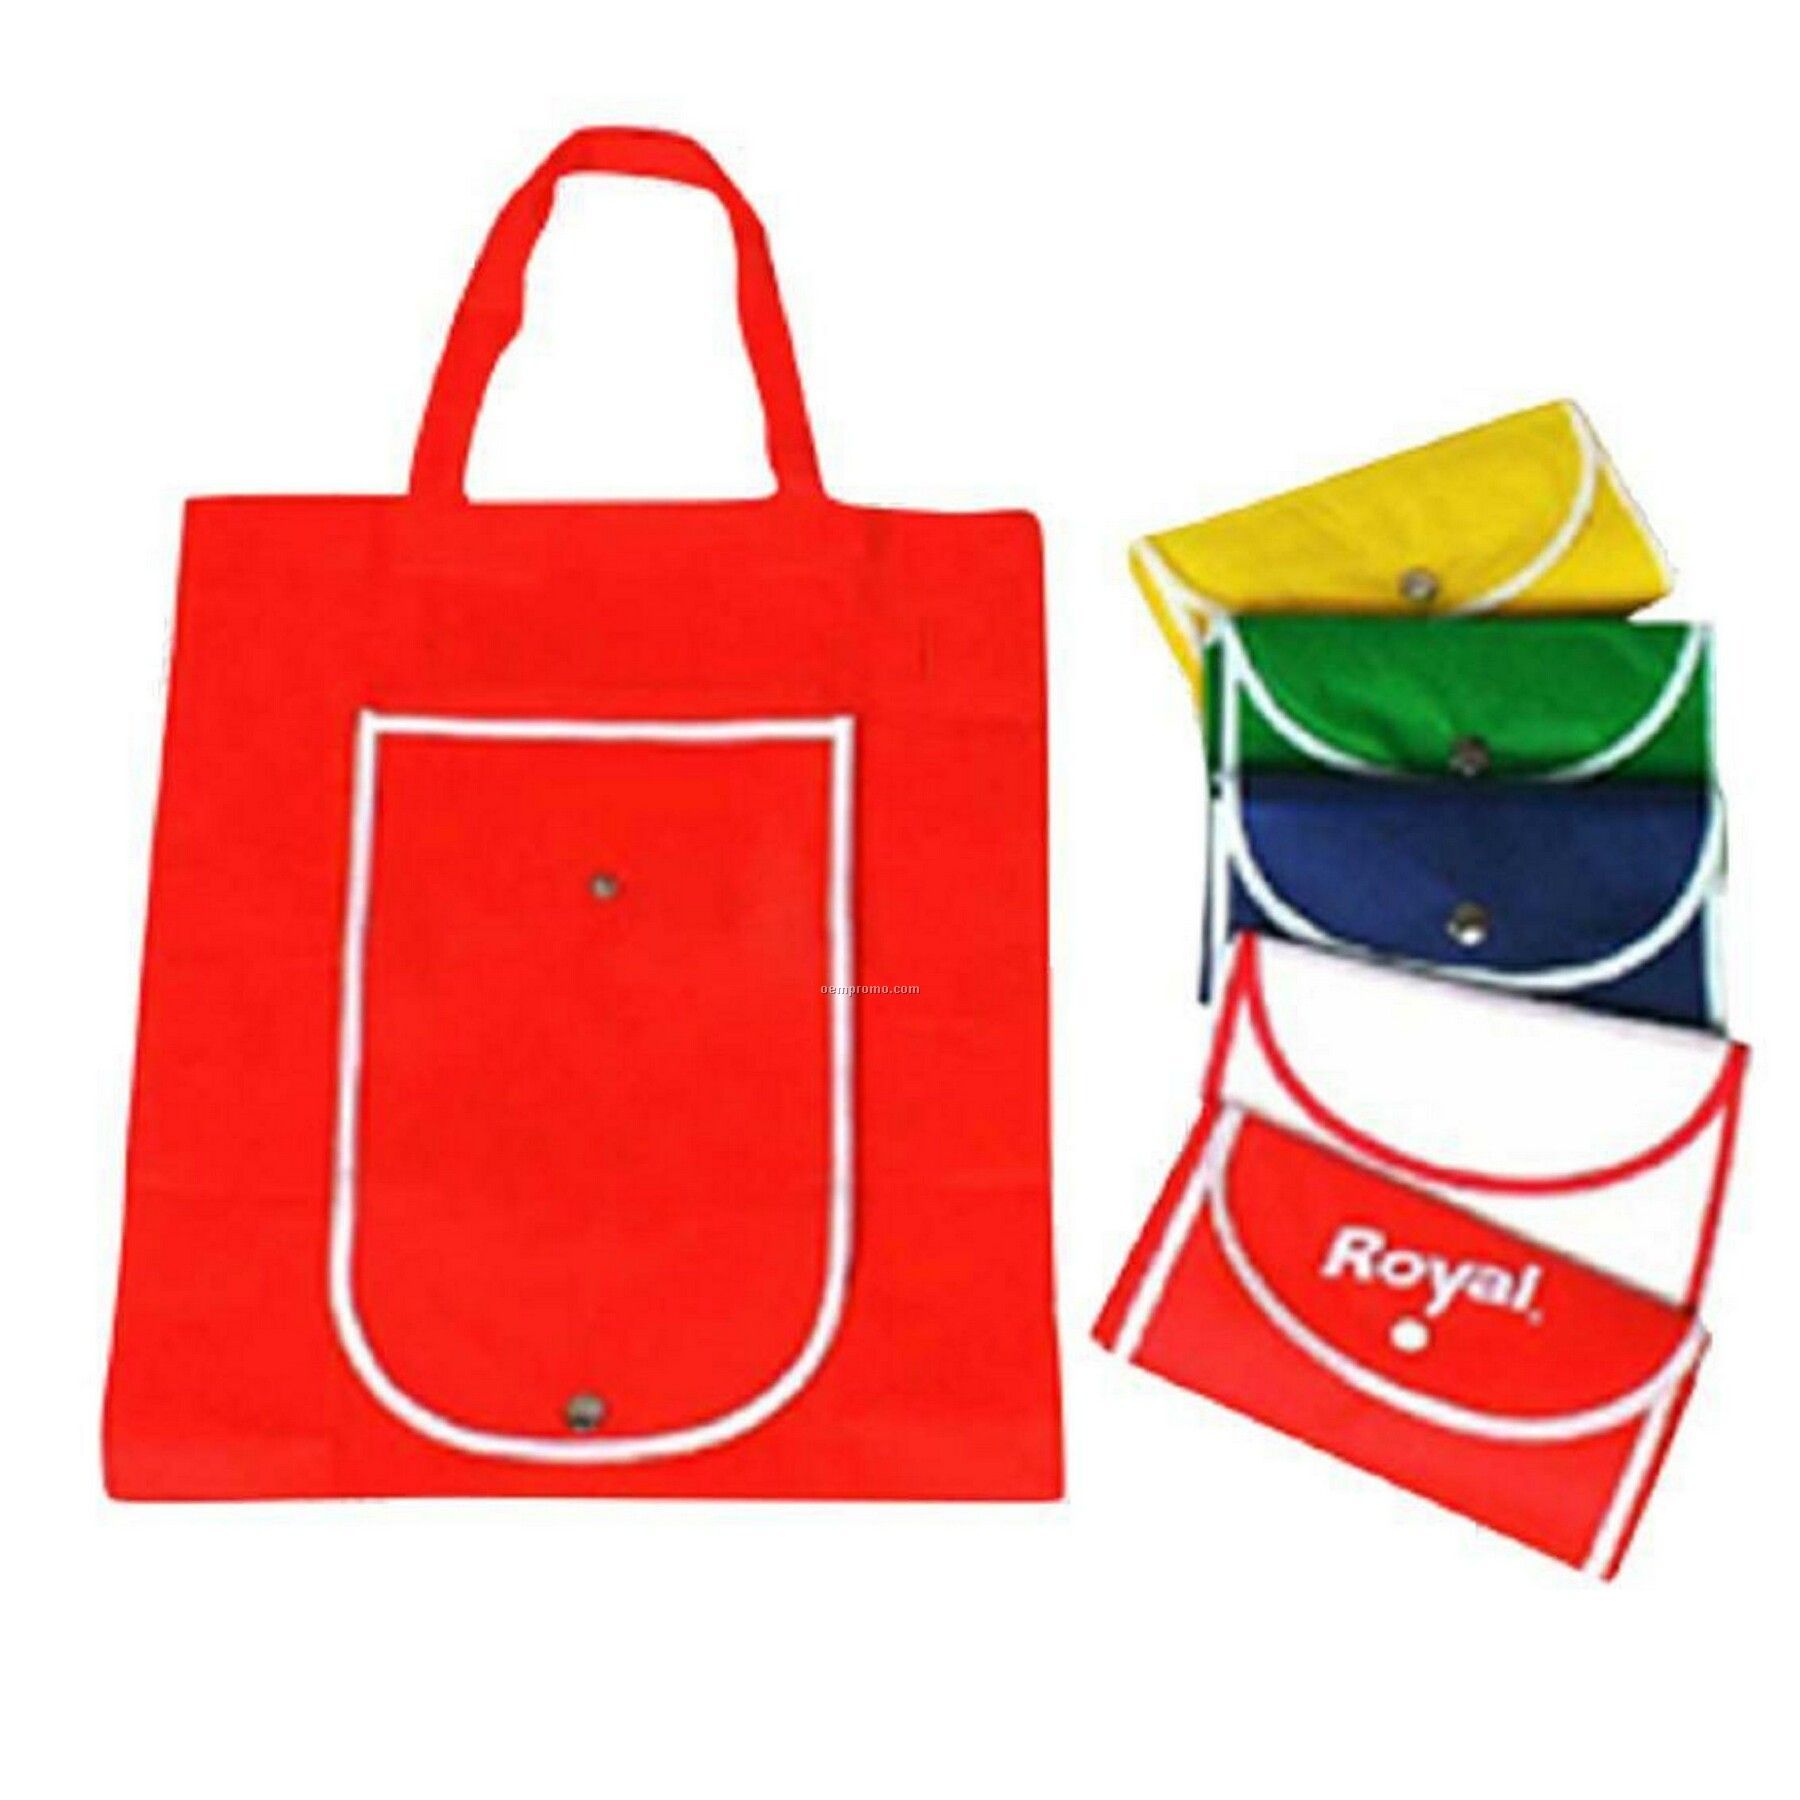 High Quality Non Woven Tote Bag. 80 Gsm Fabric, Measures 15